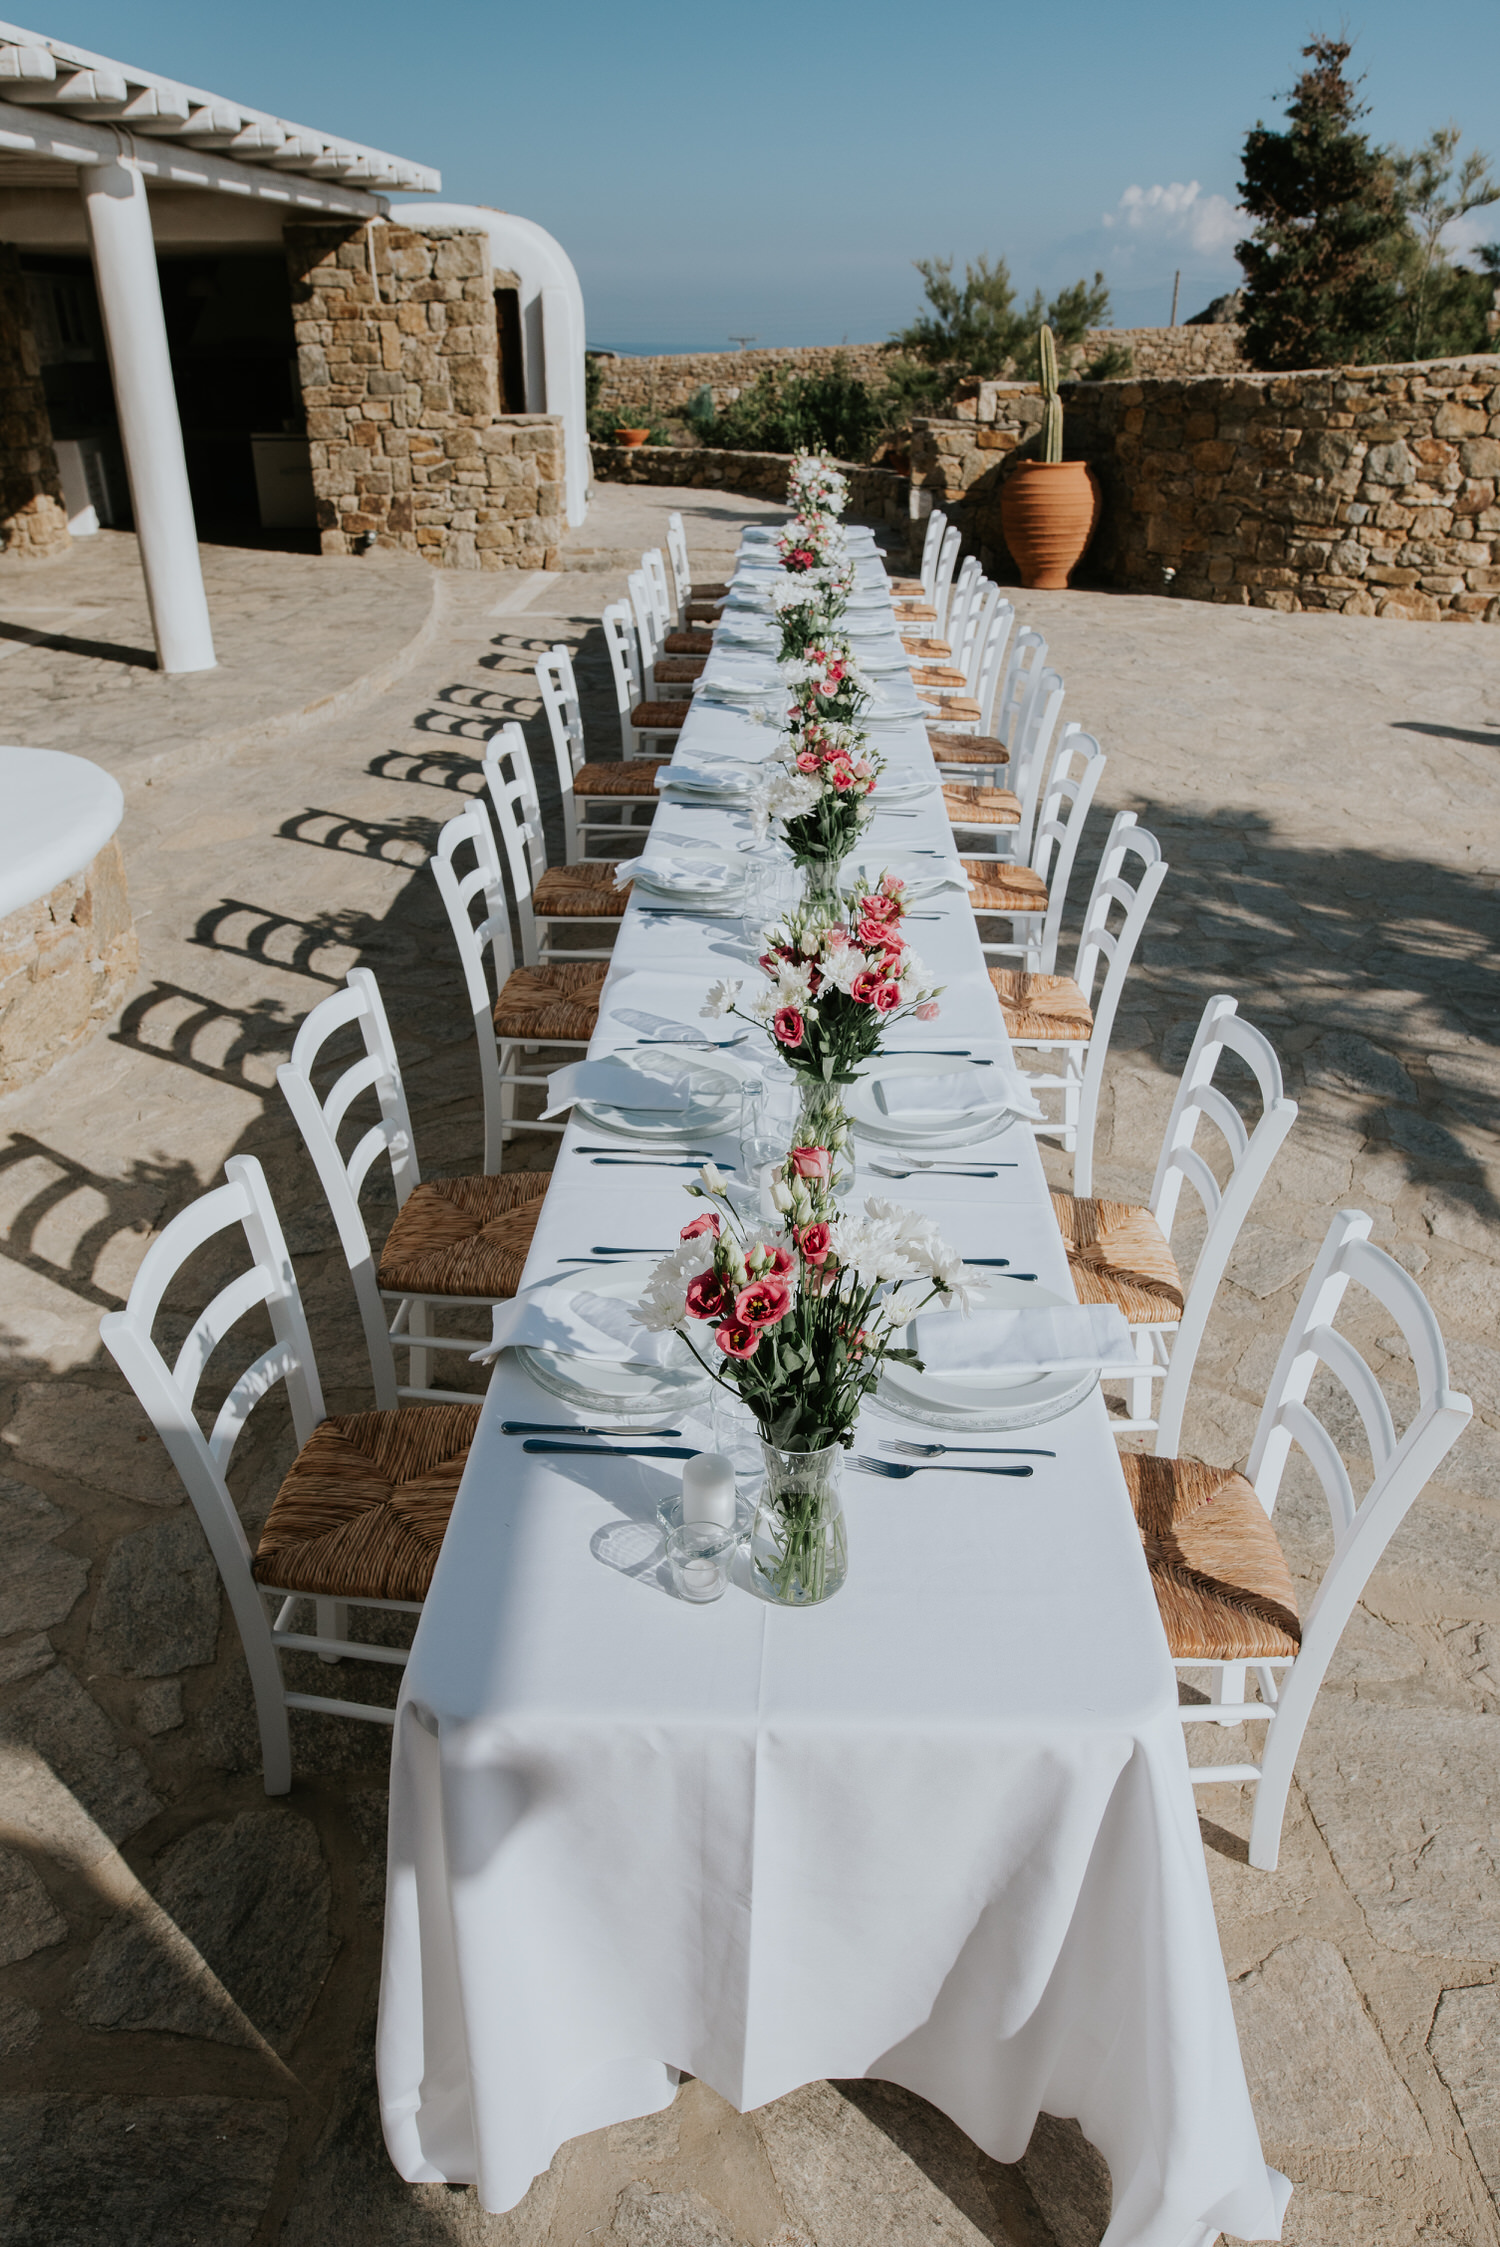 Mykonos wedding photographer: long reception table setup in the afternoon light with flower arrangements and guests and the villa in the background.